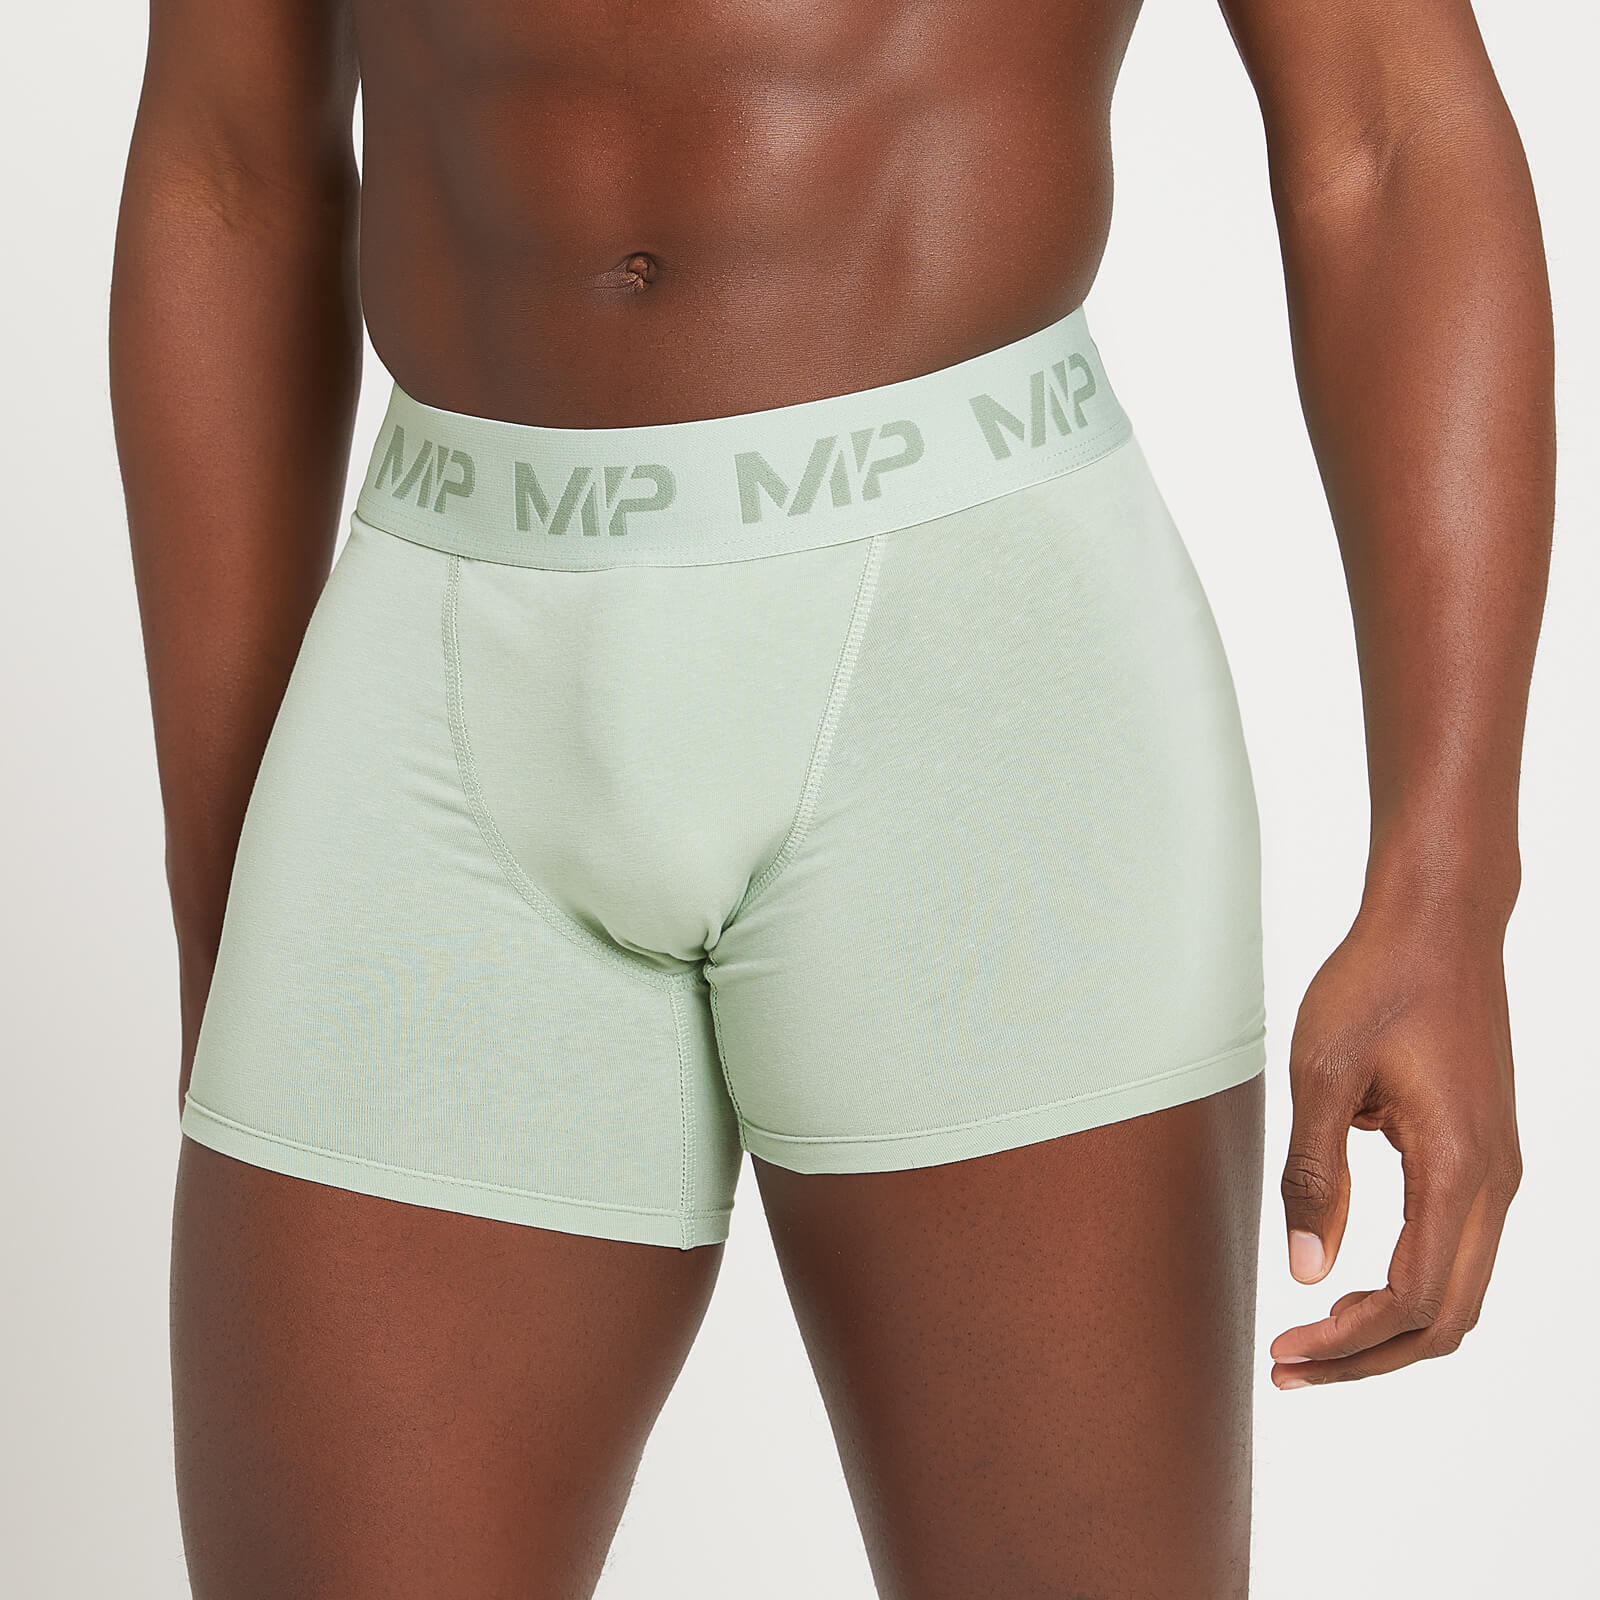 MP Men's Boxers (3 Pack) - Frost Green/Steel Blue/Ice Blue - L